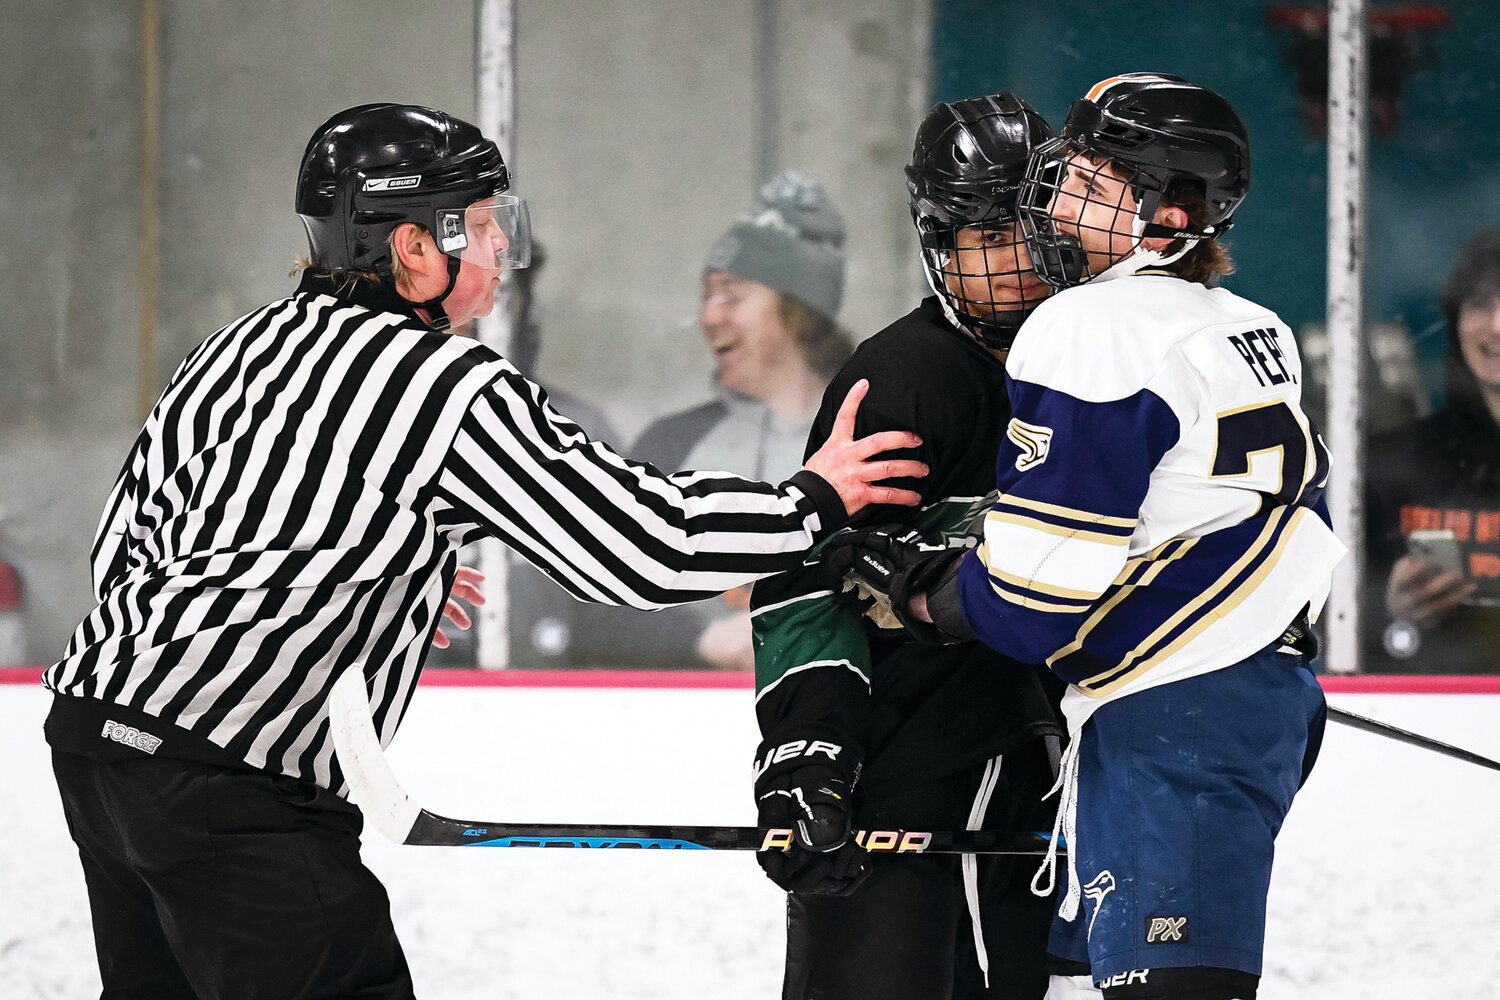 Pennridge’s Tyler Manto and Council Rock South’s Blaize Pepe exchange words and have to be separated during the second period.